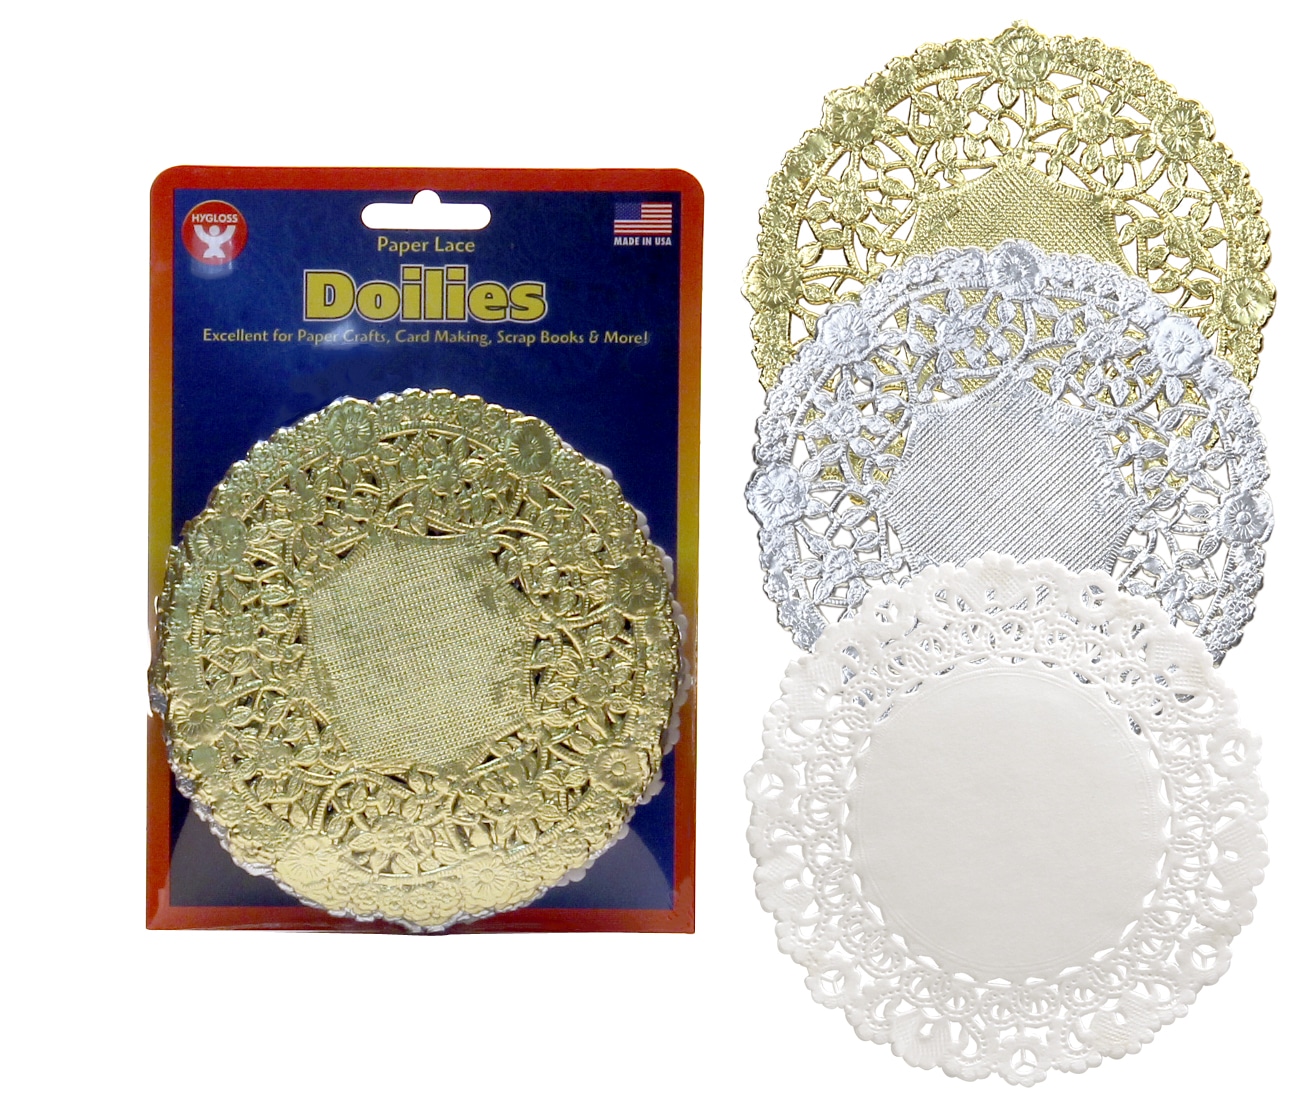 Parties Hygloss Products Heart Paper Doilies 4 Inch White Lace Doily for Decorations Crafts 100 Pack 